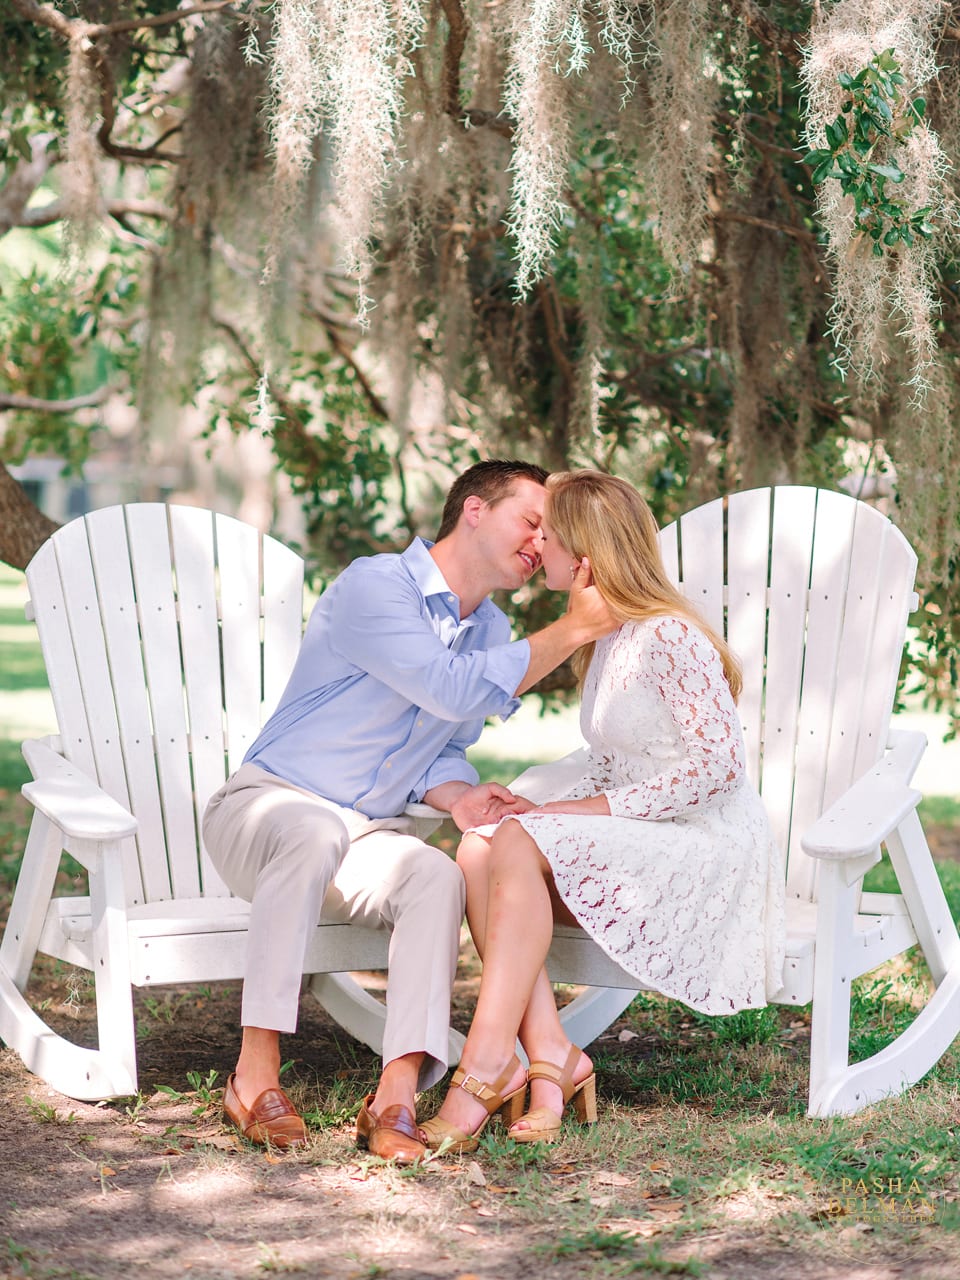 Elegant Engagement Session at Wachesaw Plantation in Murrells Inlet by Pasha Belman Photography - top Engagement Photography 